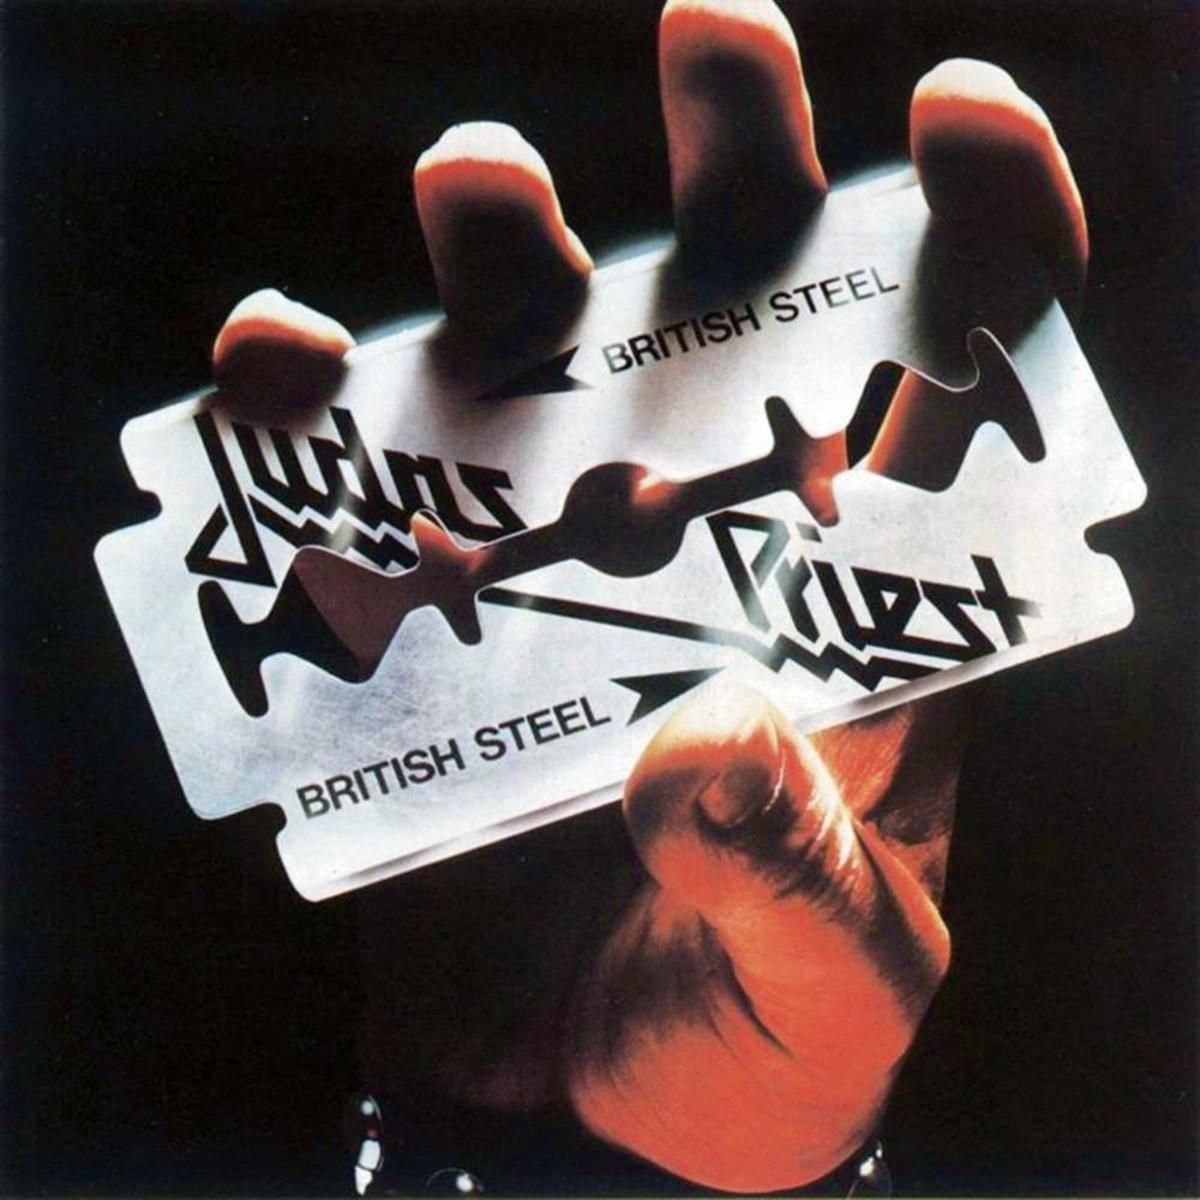 The album cover shows a person holding steel in their fingers. The album lacks the heaviness and aggressive nature of their 1990 album Painkiller but Judas Priest was a different band back then.